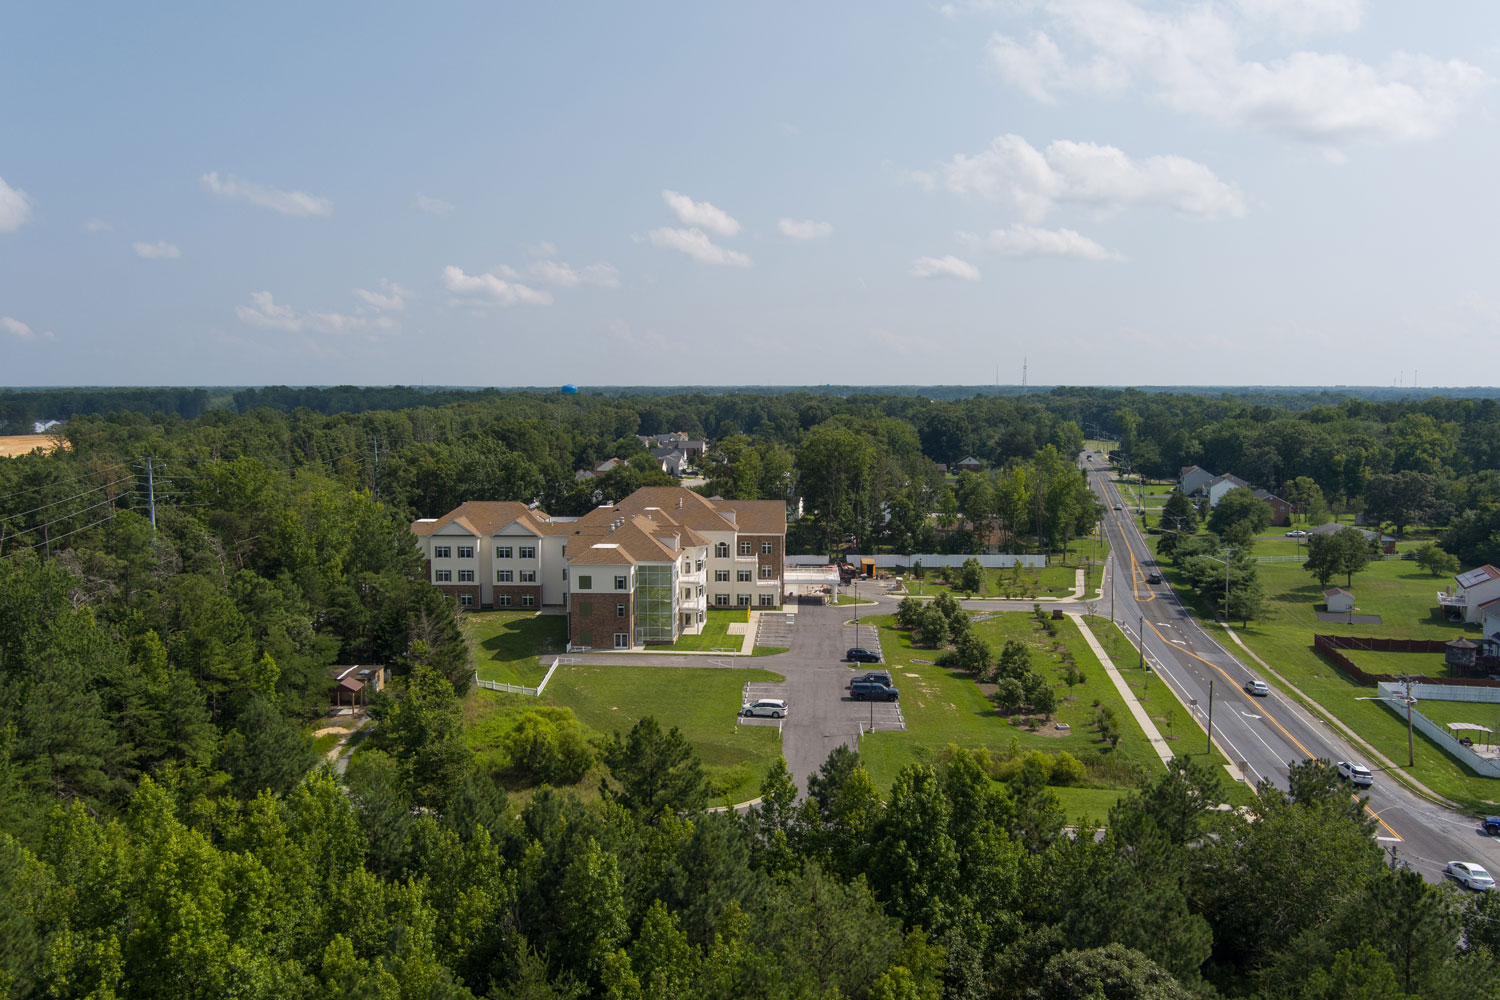 View of Alpas Wellness Outside Overview from drone